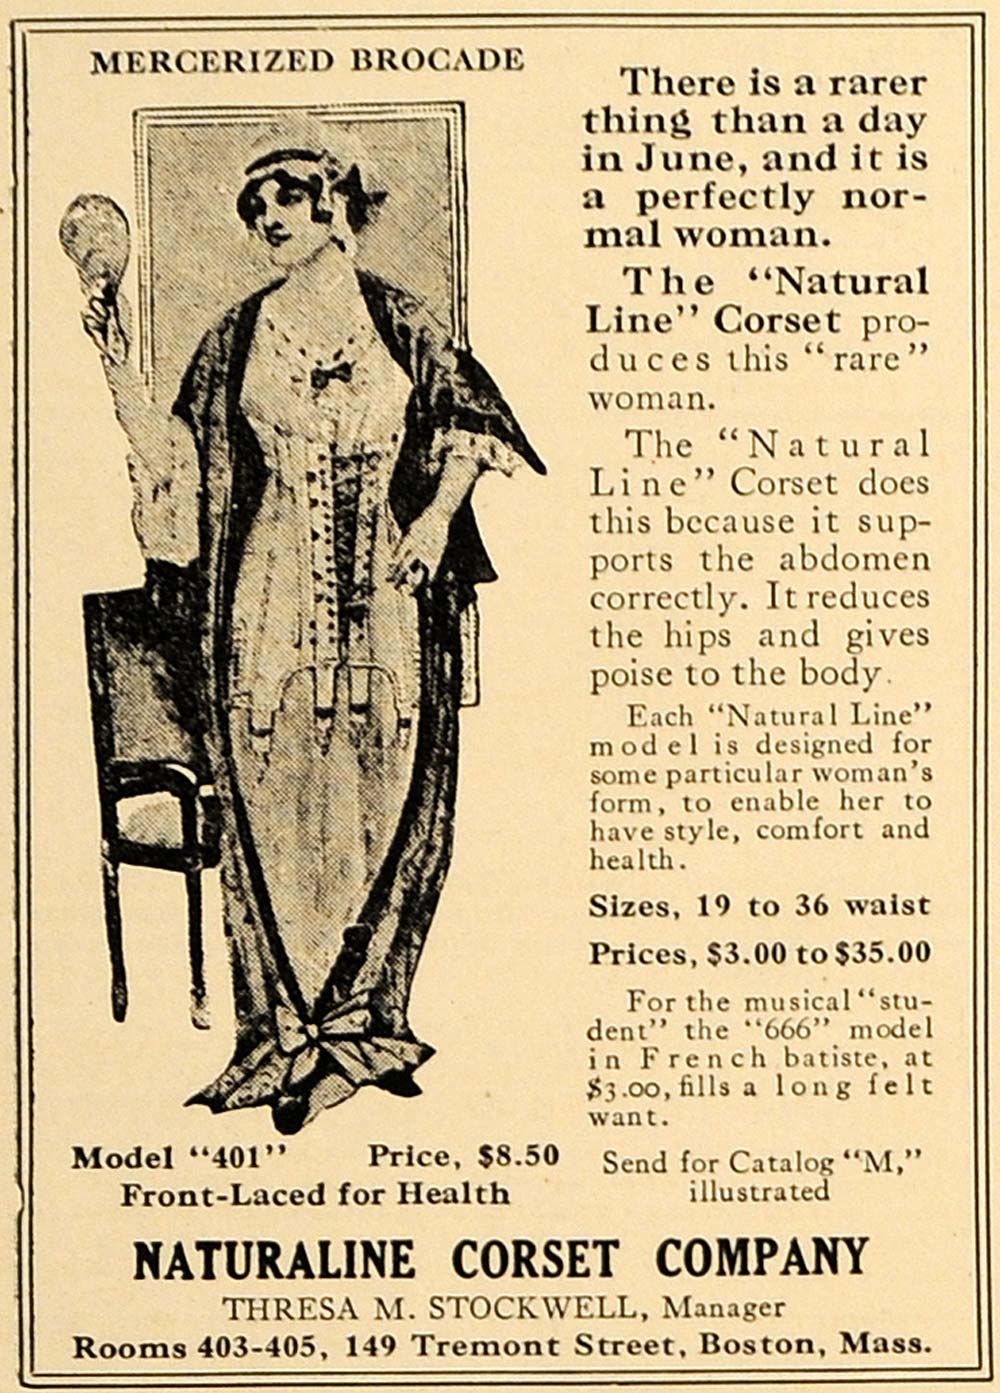 An advertisement for Drew's whalebone corsets. Dated 19th century. - Album  alb4316229